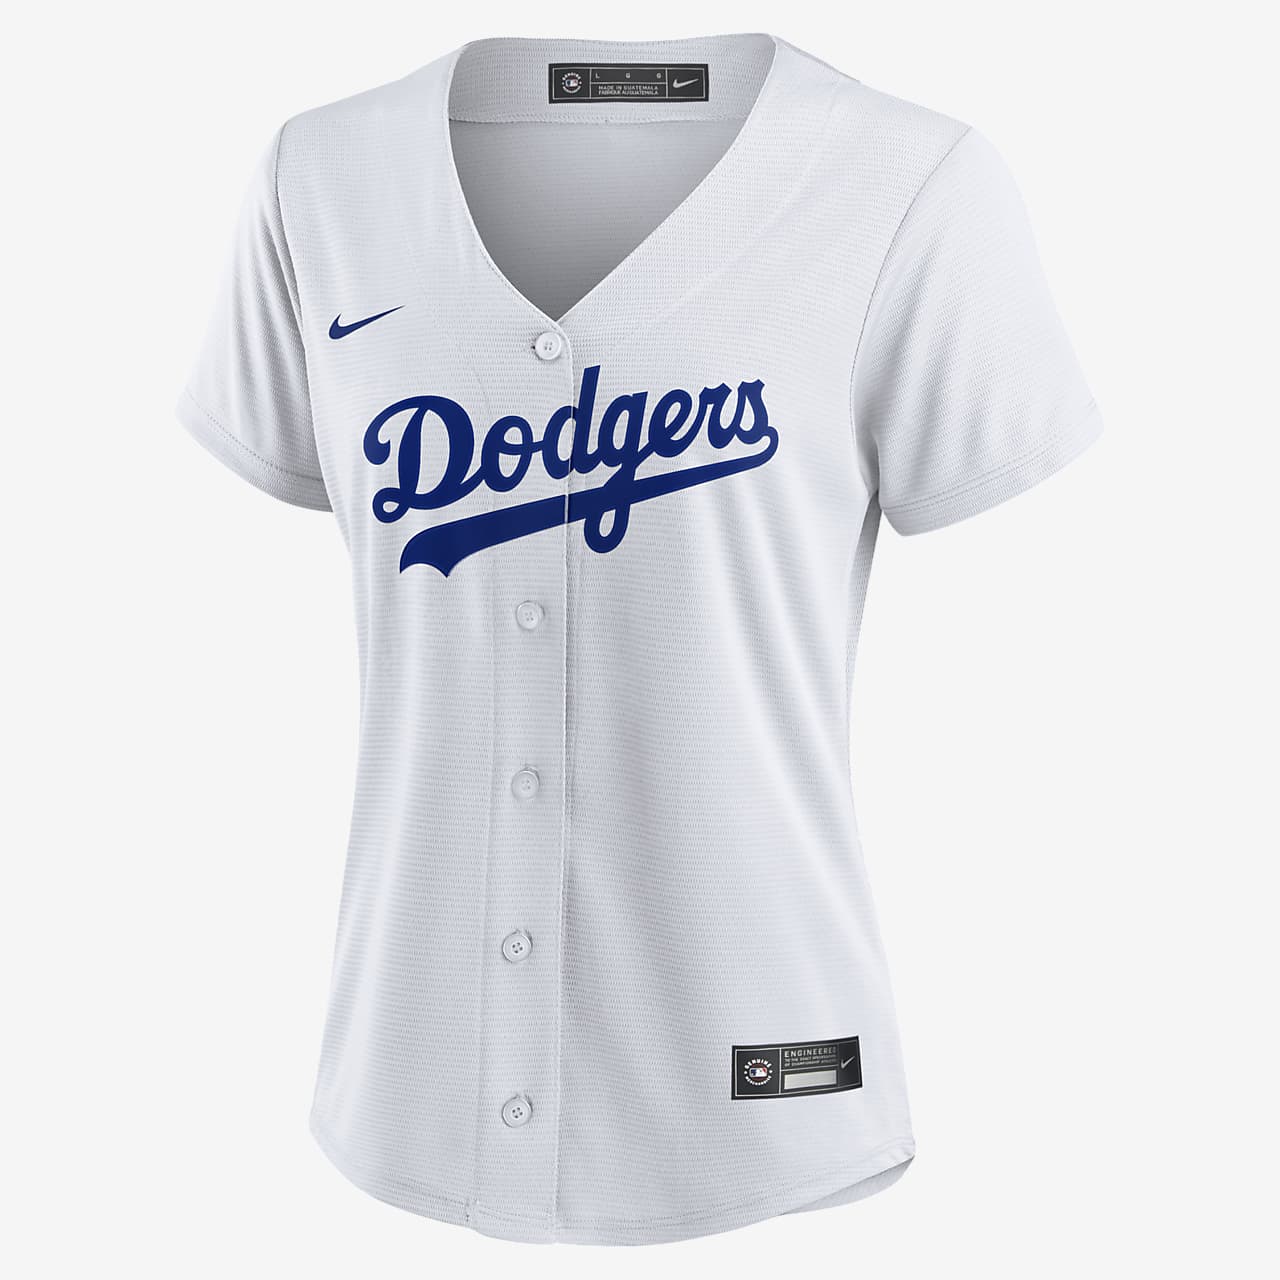 dodgers clothing sale